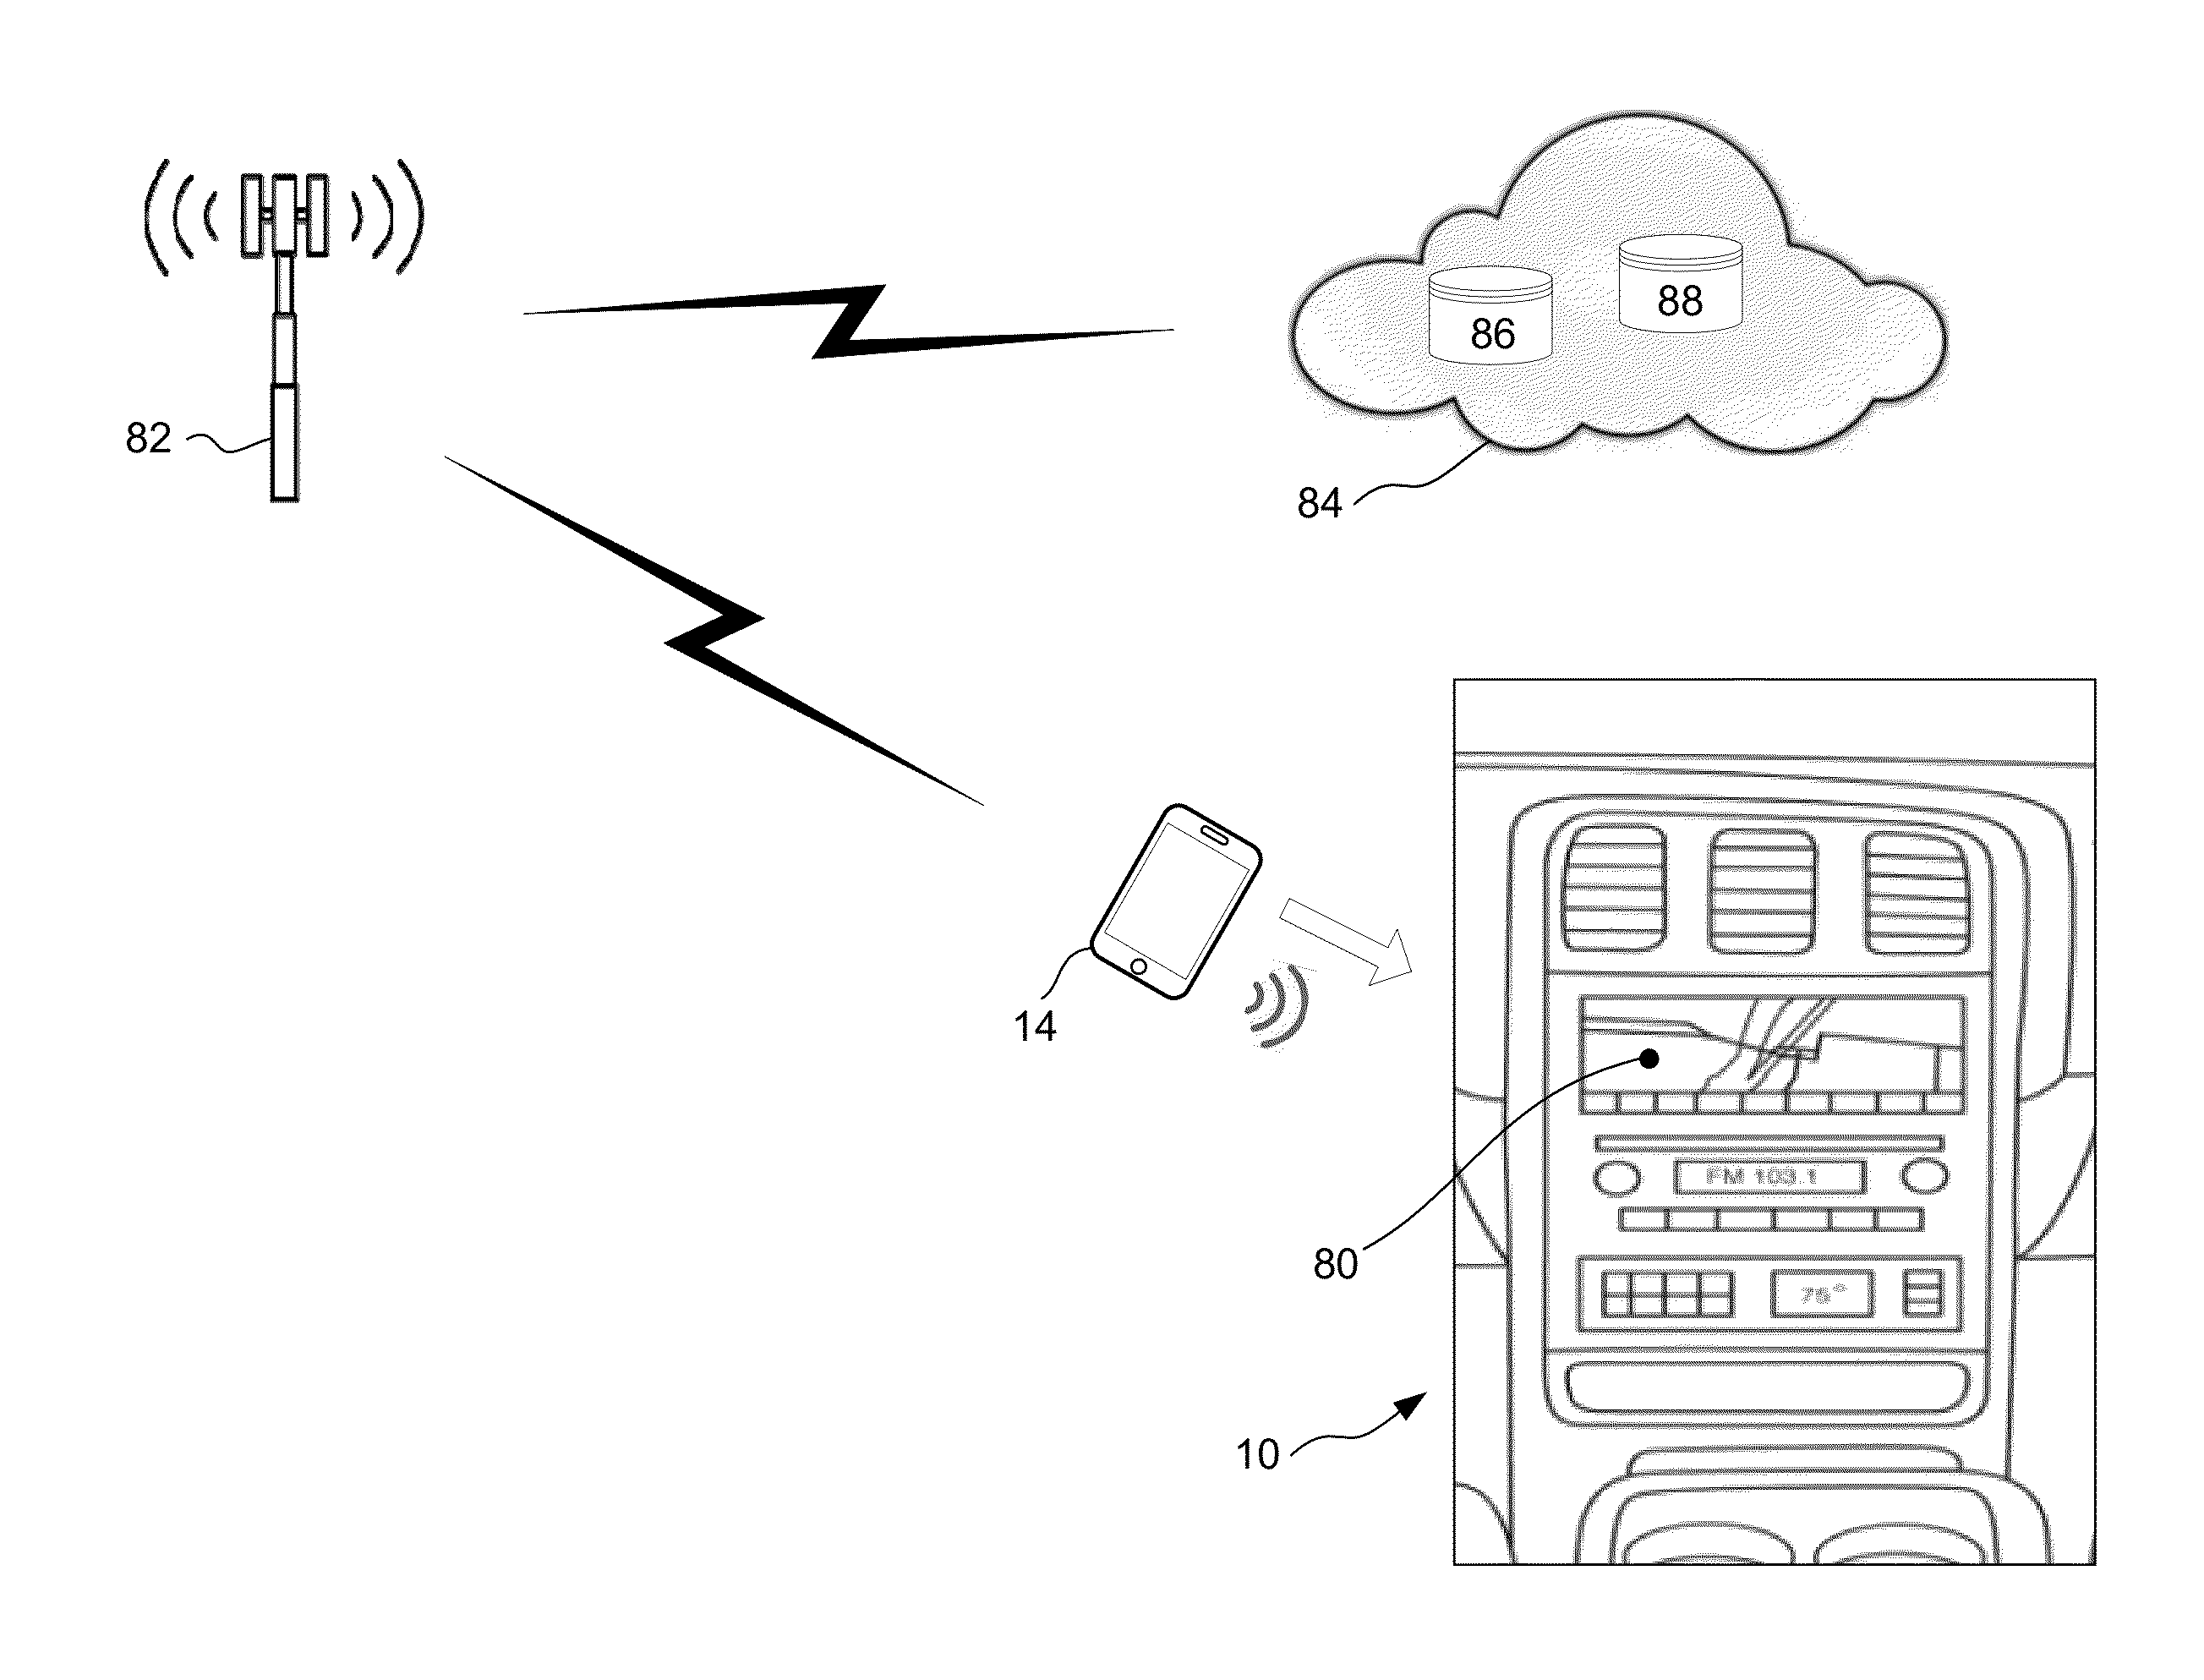 Methods of controlling vehicle interfaces using device motion and near field communications